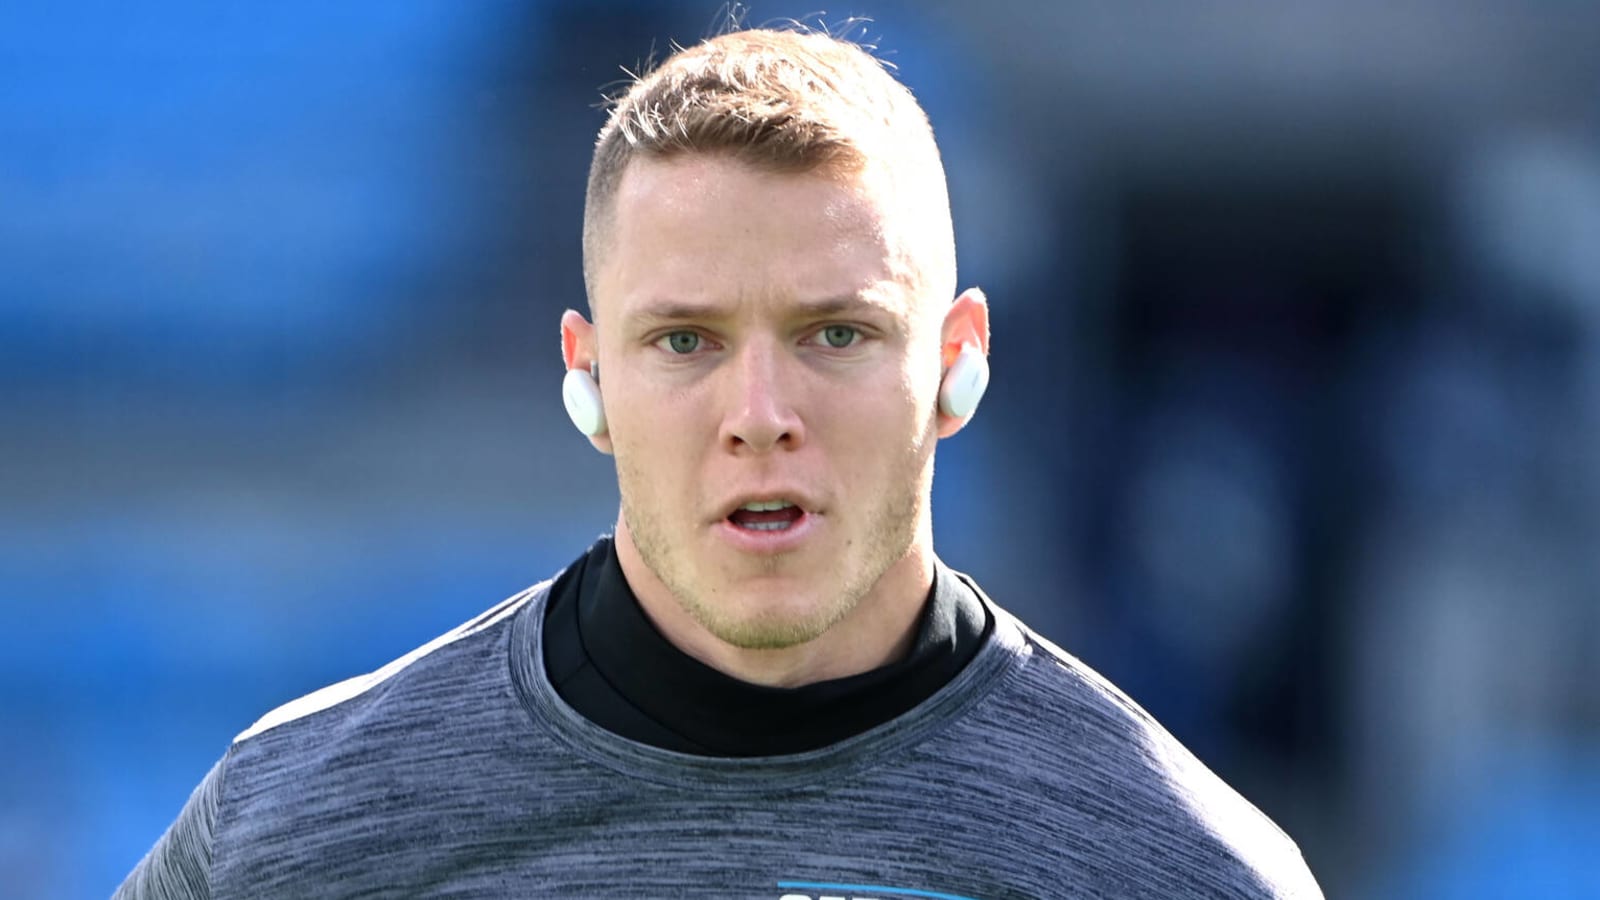 Panthers rework RB Christian McCaffrey's contract